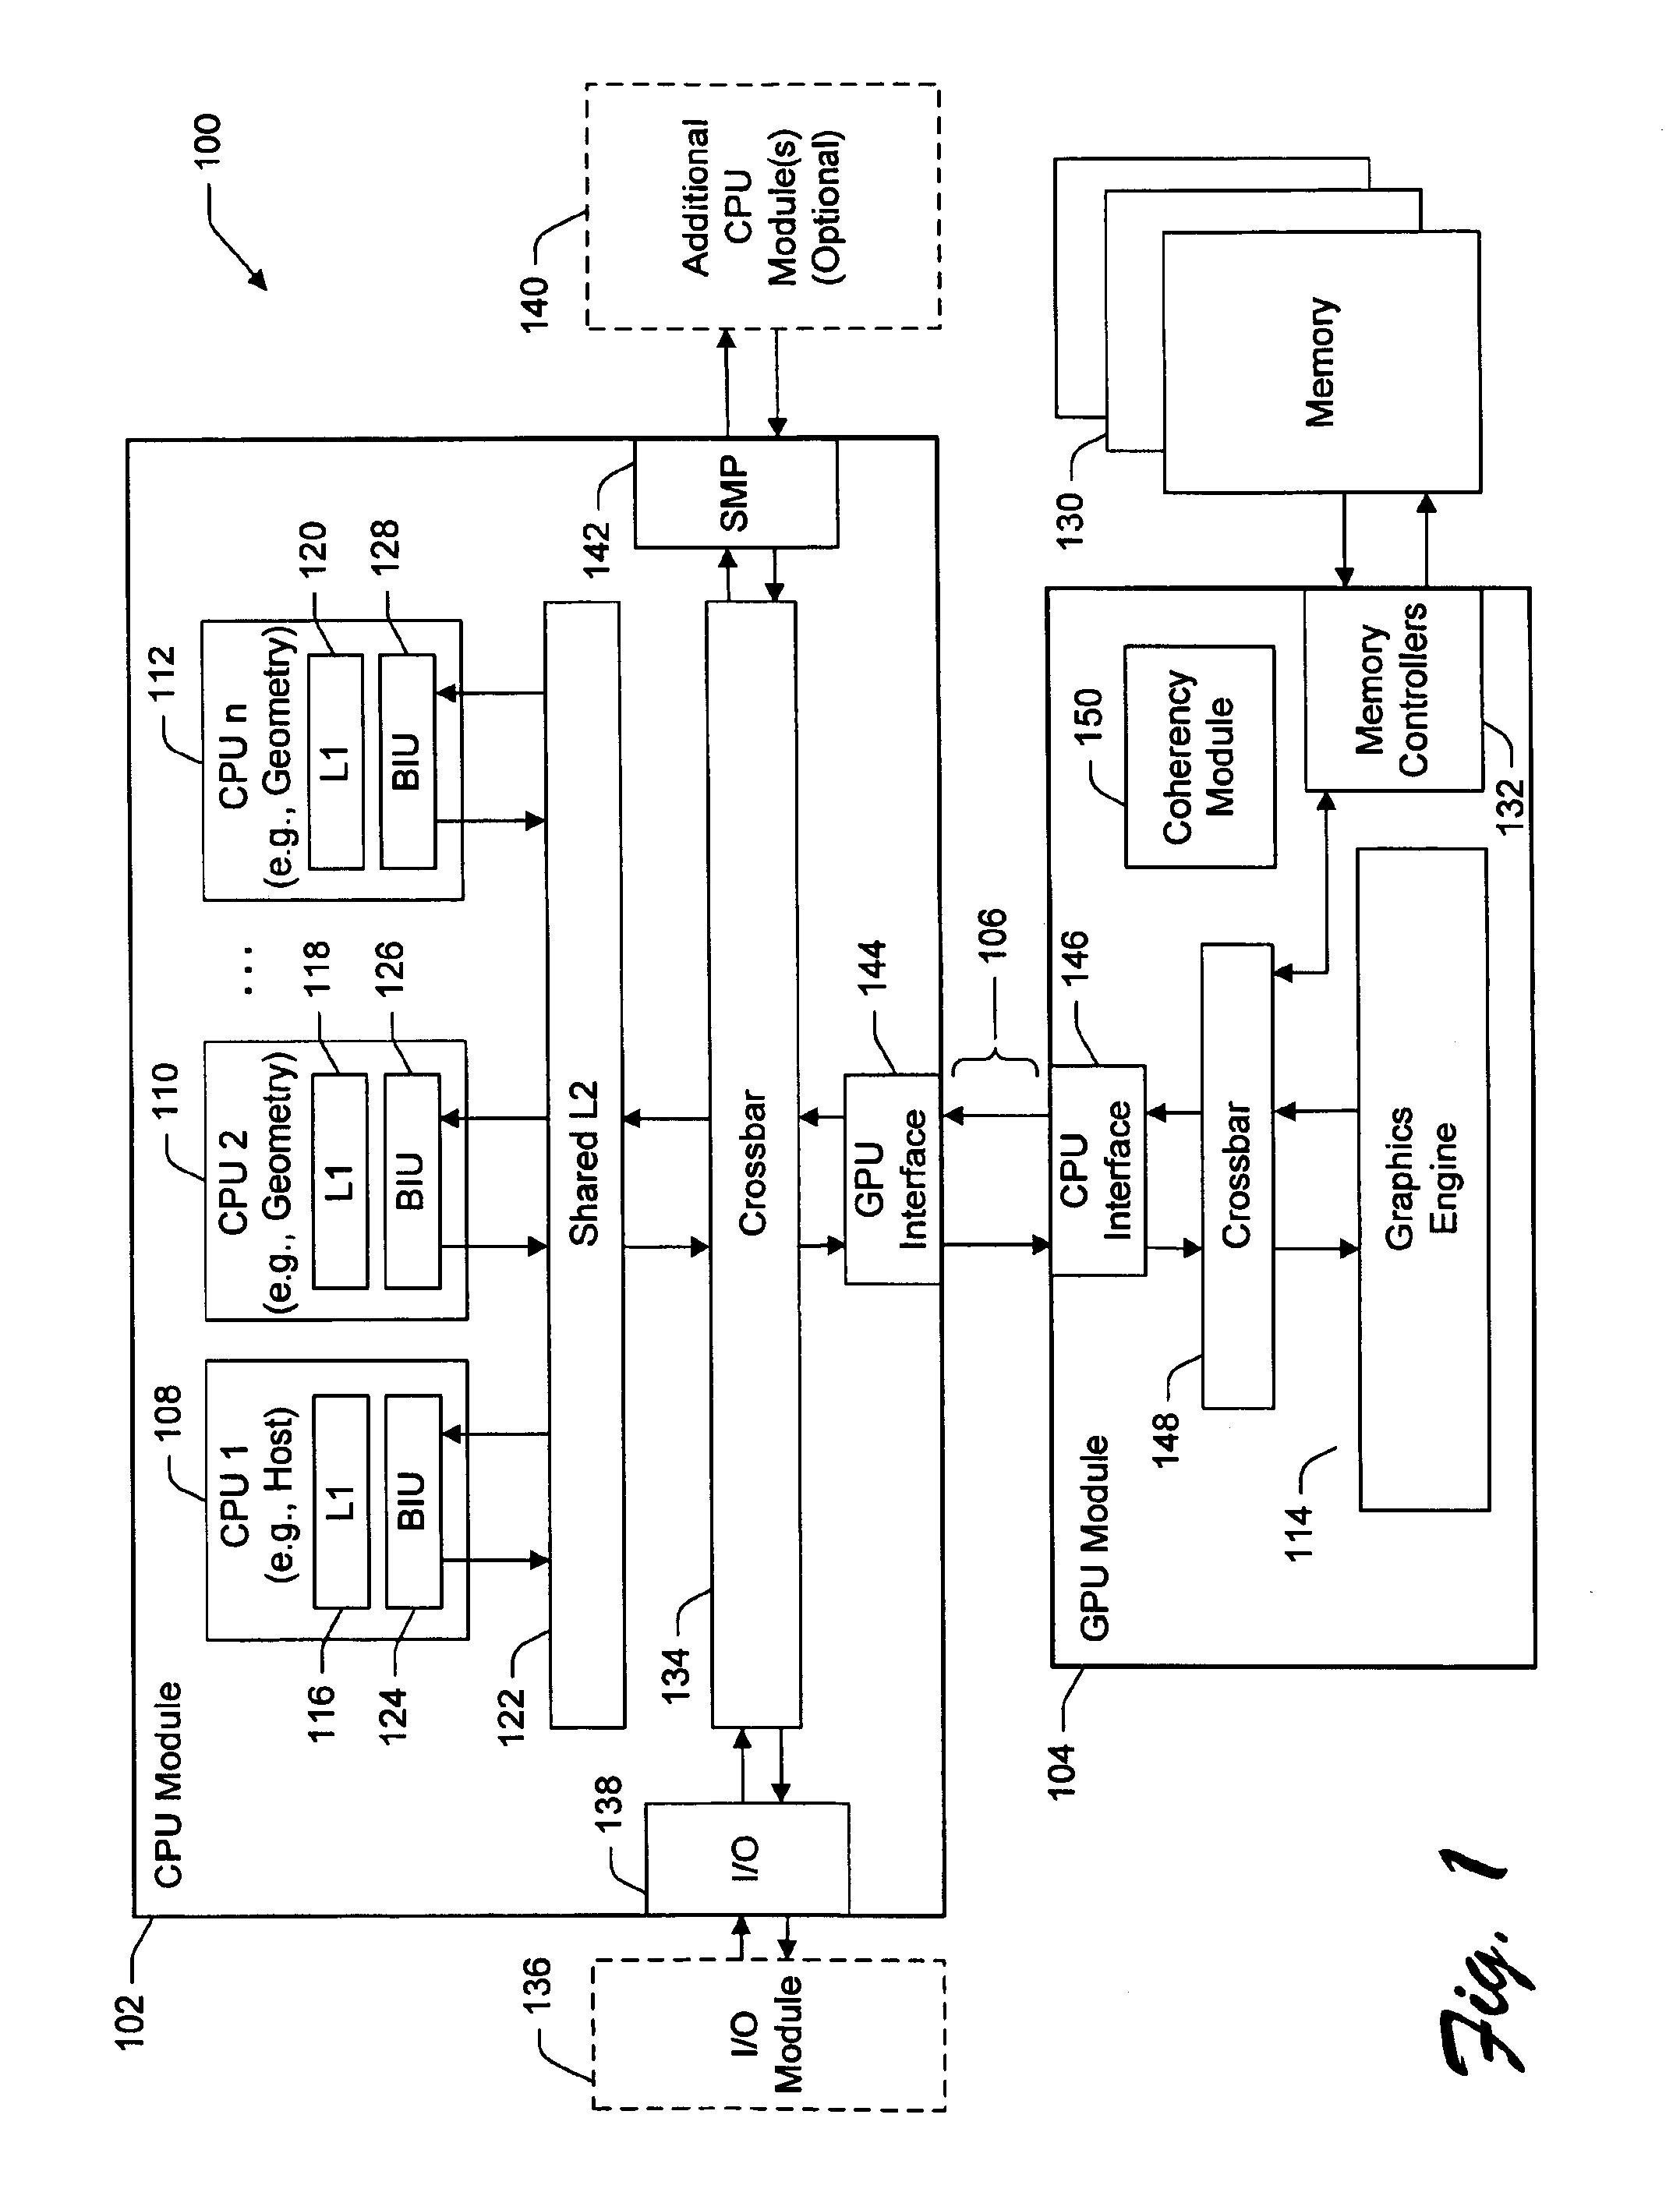 System and method for parallel execution of data generation tasks